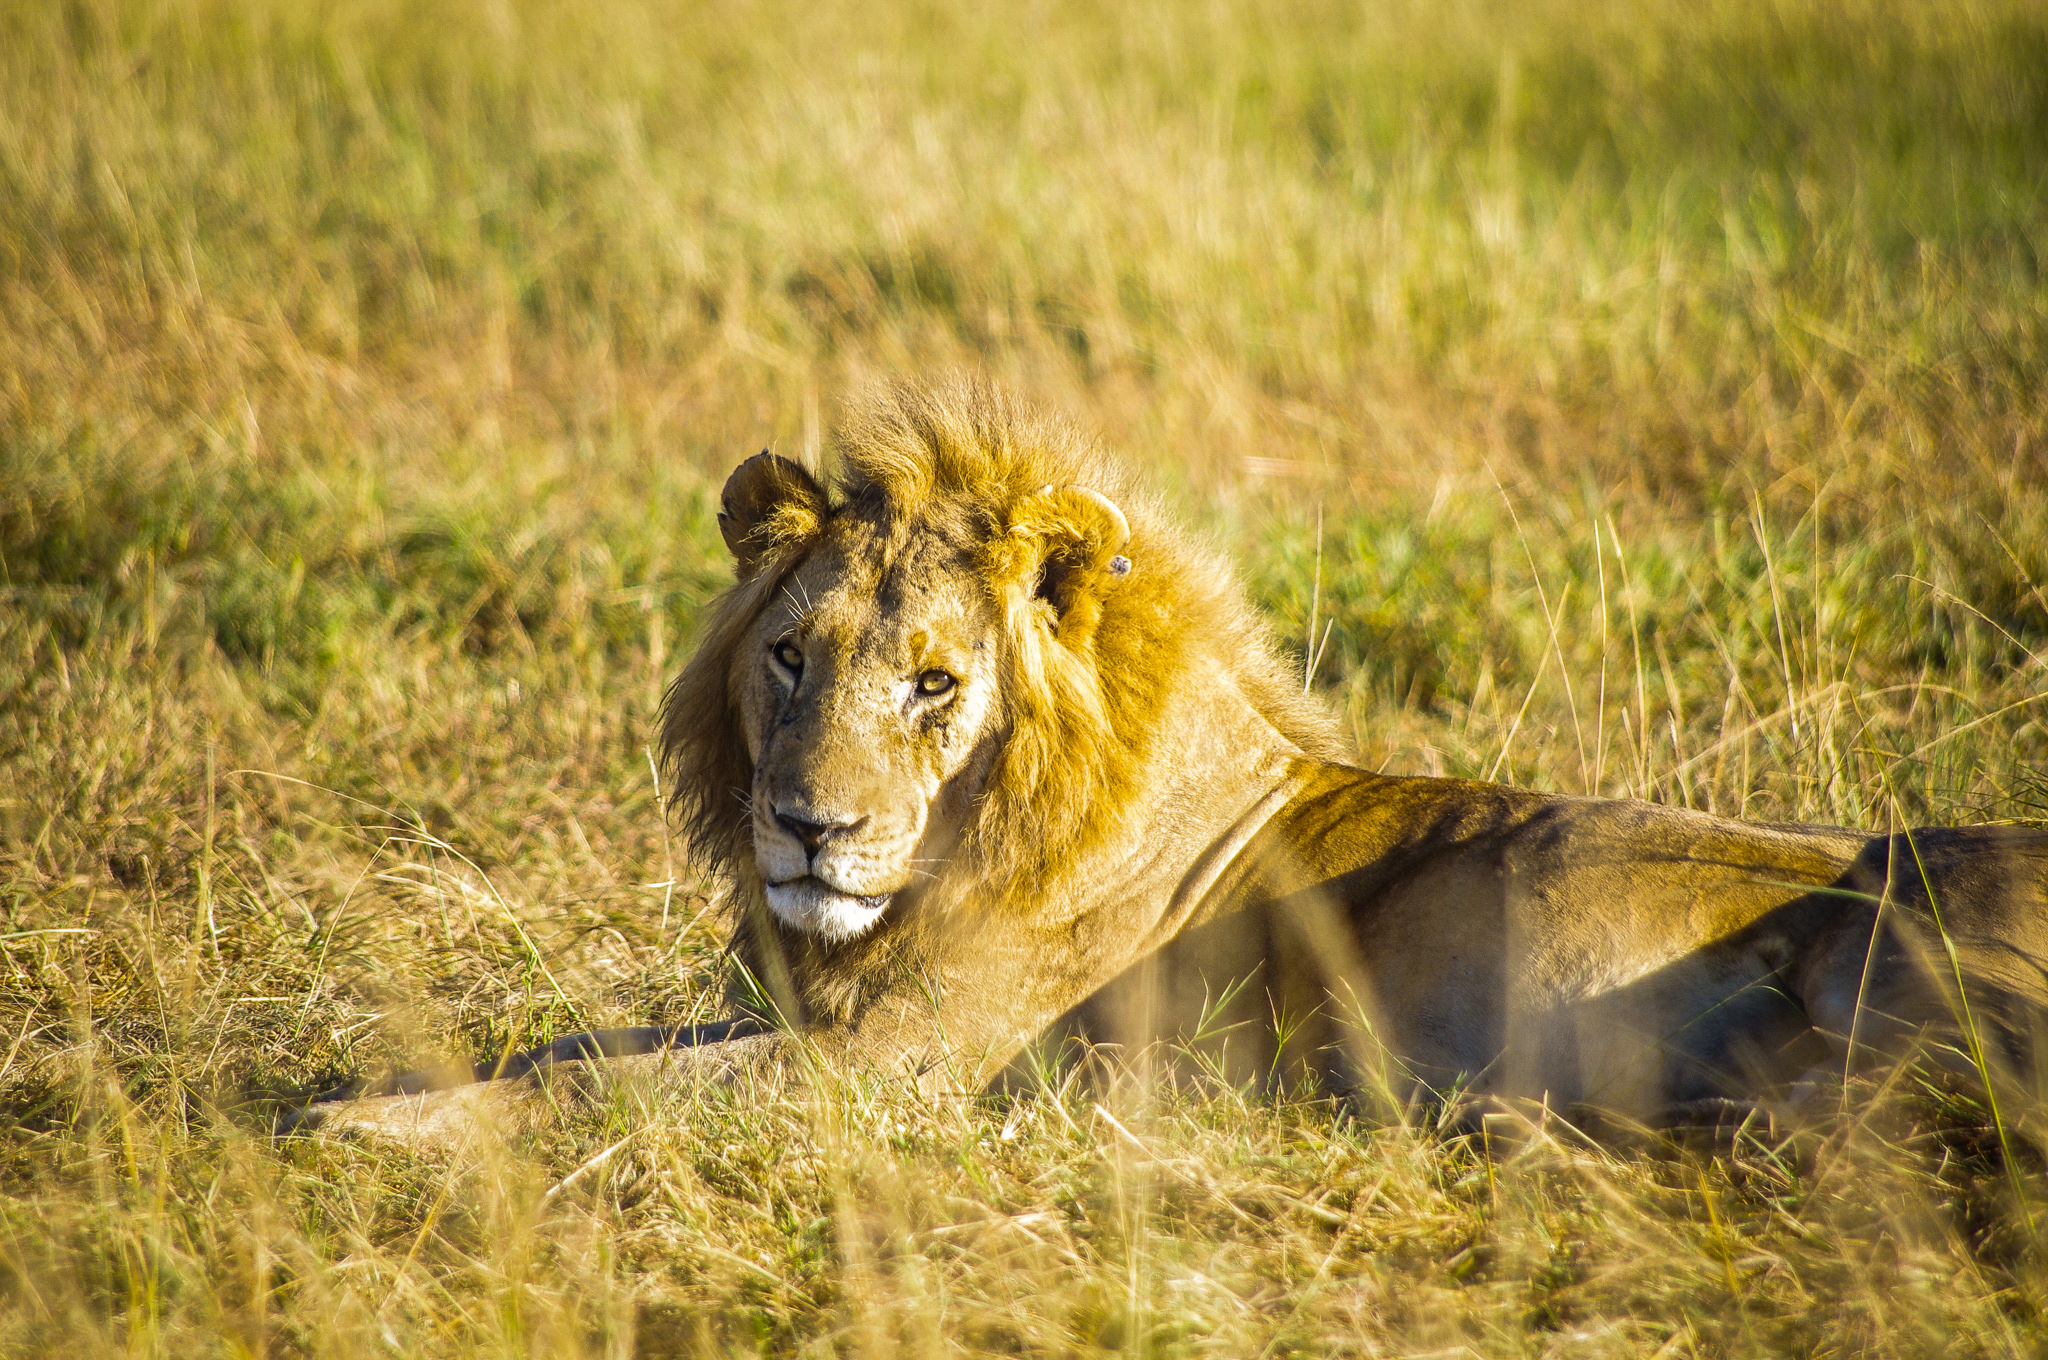 The second picture is of a male lion, taken in Kenya’s breathtaking Maasai Mara National Reserve. Its sheer size and beauty was astounding - unlike any other animal I had ever seen. His remarkably lazy yet confident attitude took me aback as he really seemed to have no care in the world. 